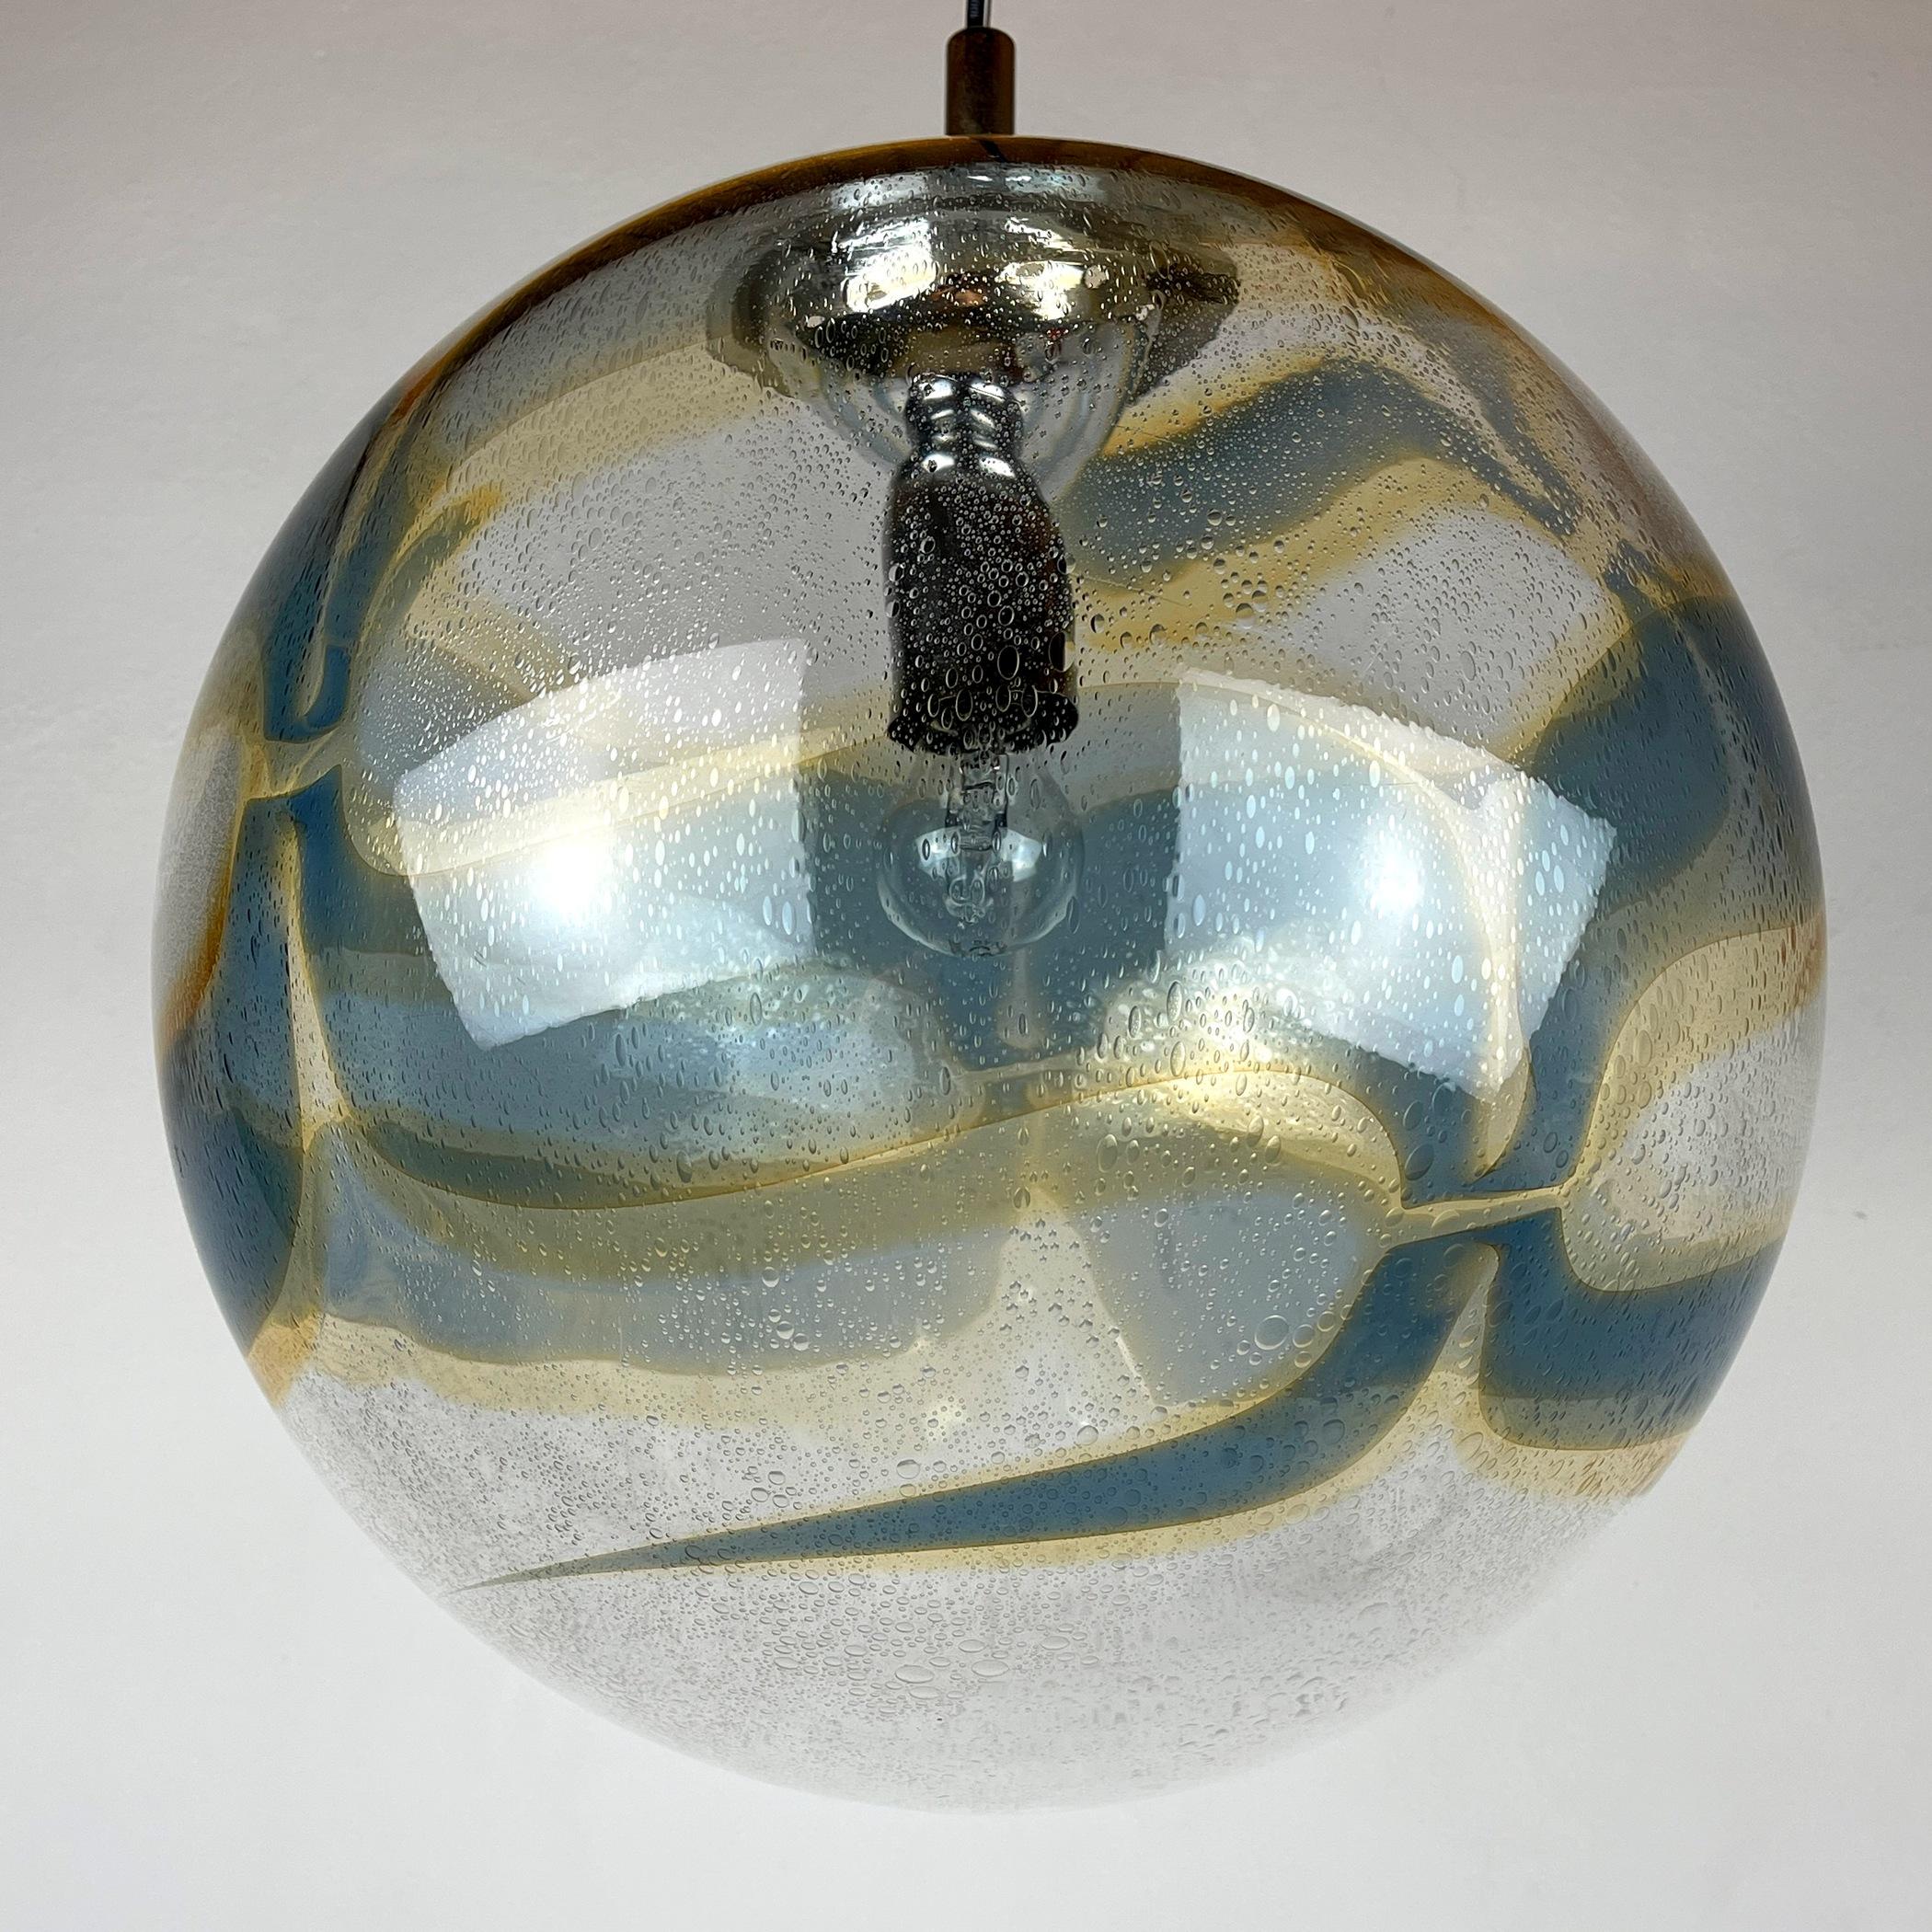 Vintage Xl Swirled Murano Glass Pendant Lamp by Vistosi Italy, 1970s For Sale 2